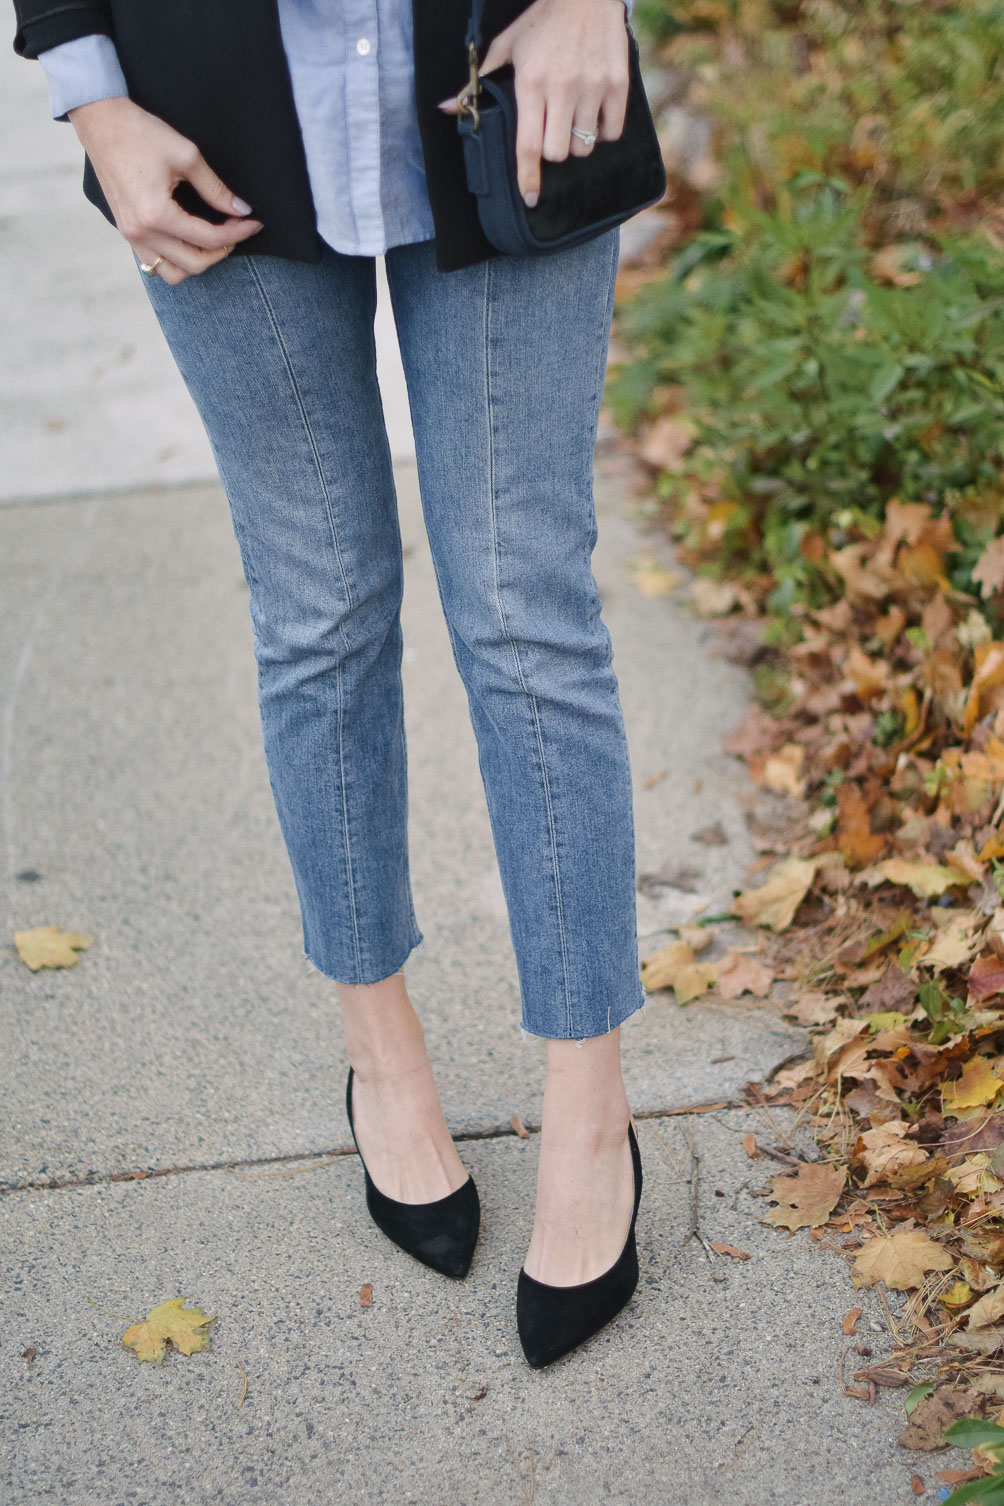 styling a fall blazer outfit with blue jeans and black suede slingback heels